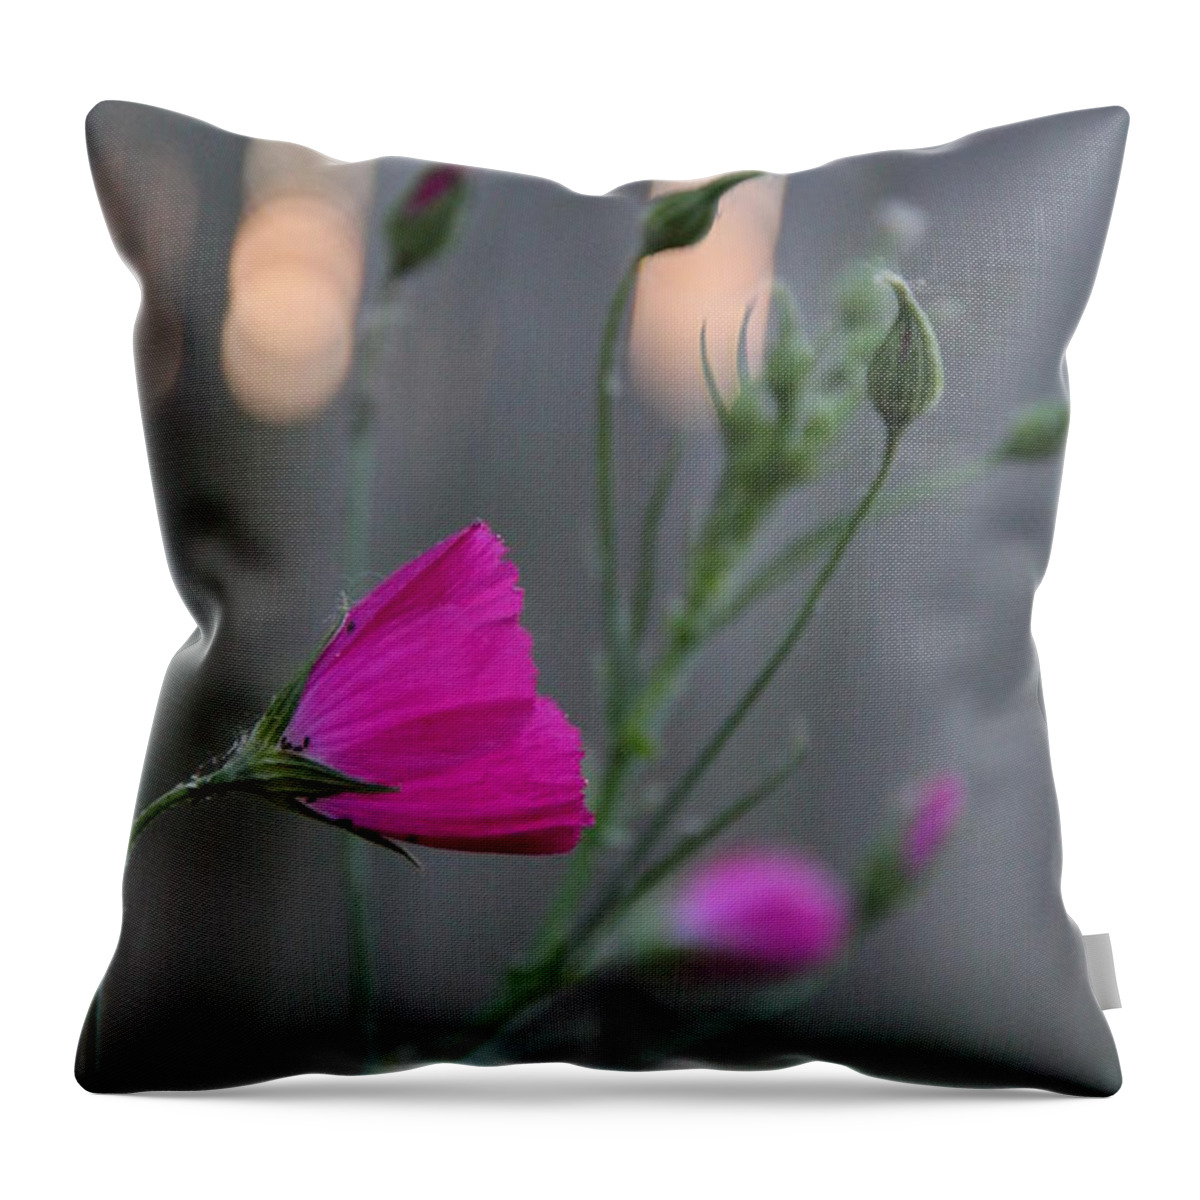 Evening Winecup Throw Pillow featuring the photograph Evening Winecup by Elizabeth Sullivan